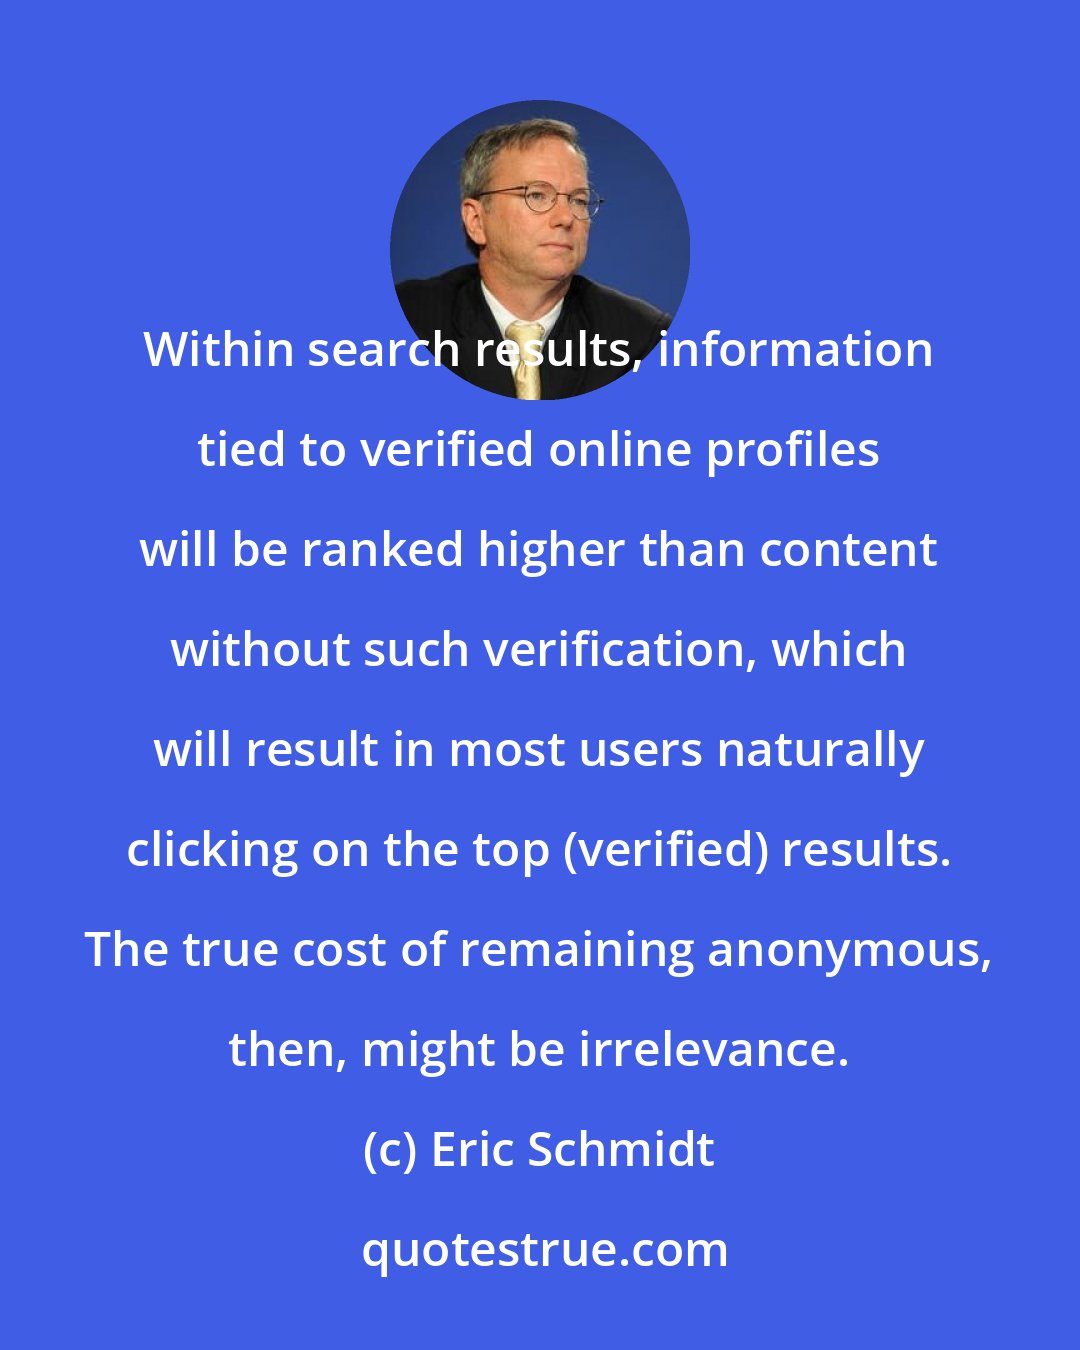 Eric Schmidt: Within search results, information tied to verified online profiles will be ranked higher than content without such verification, which will result in most users naturally clicking on the top (verified) results. The true cost of remaining anonymous, then, might be irrelevance.